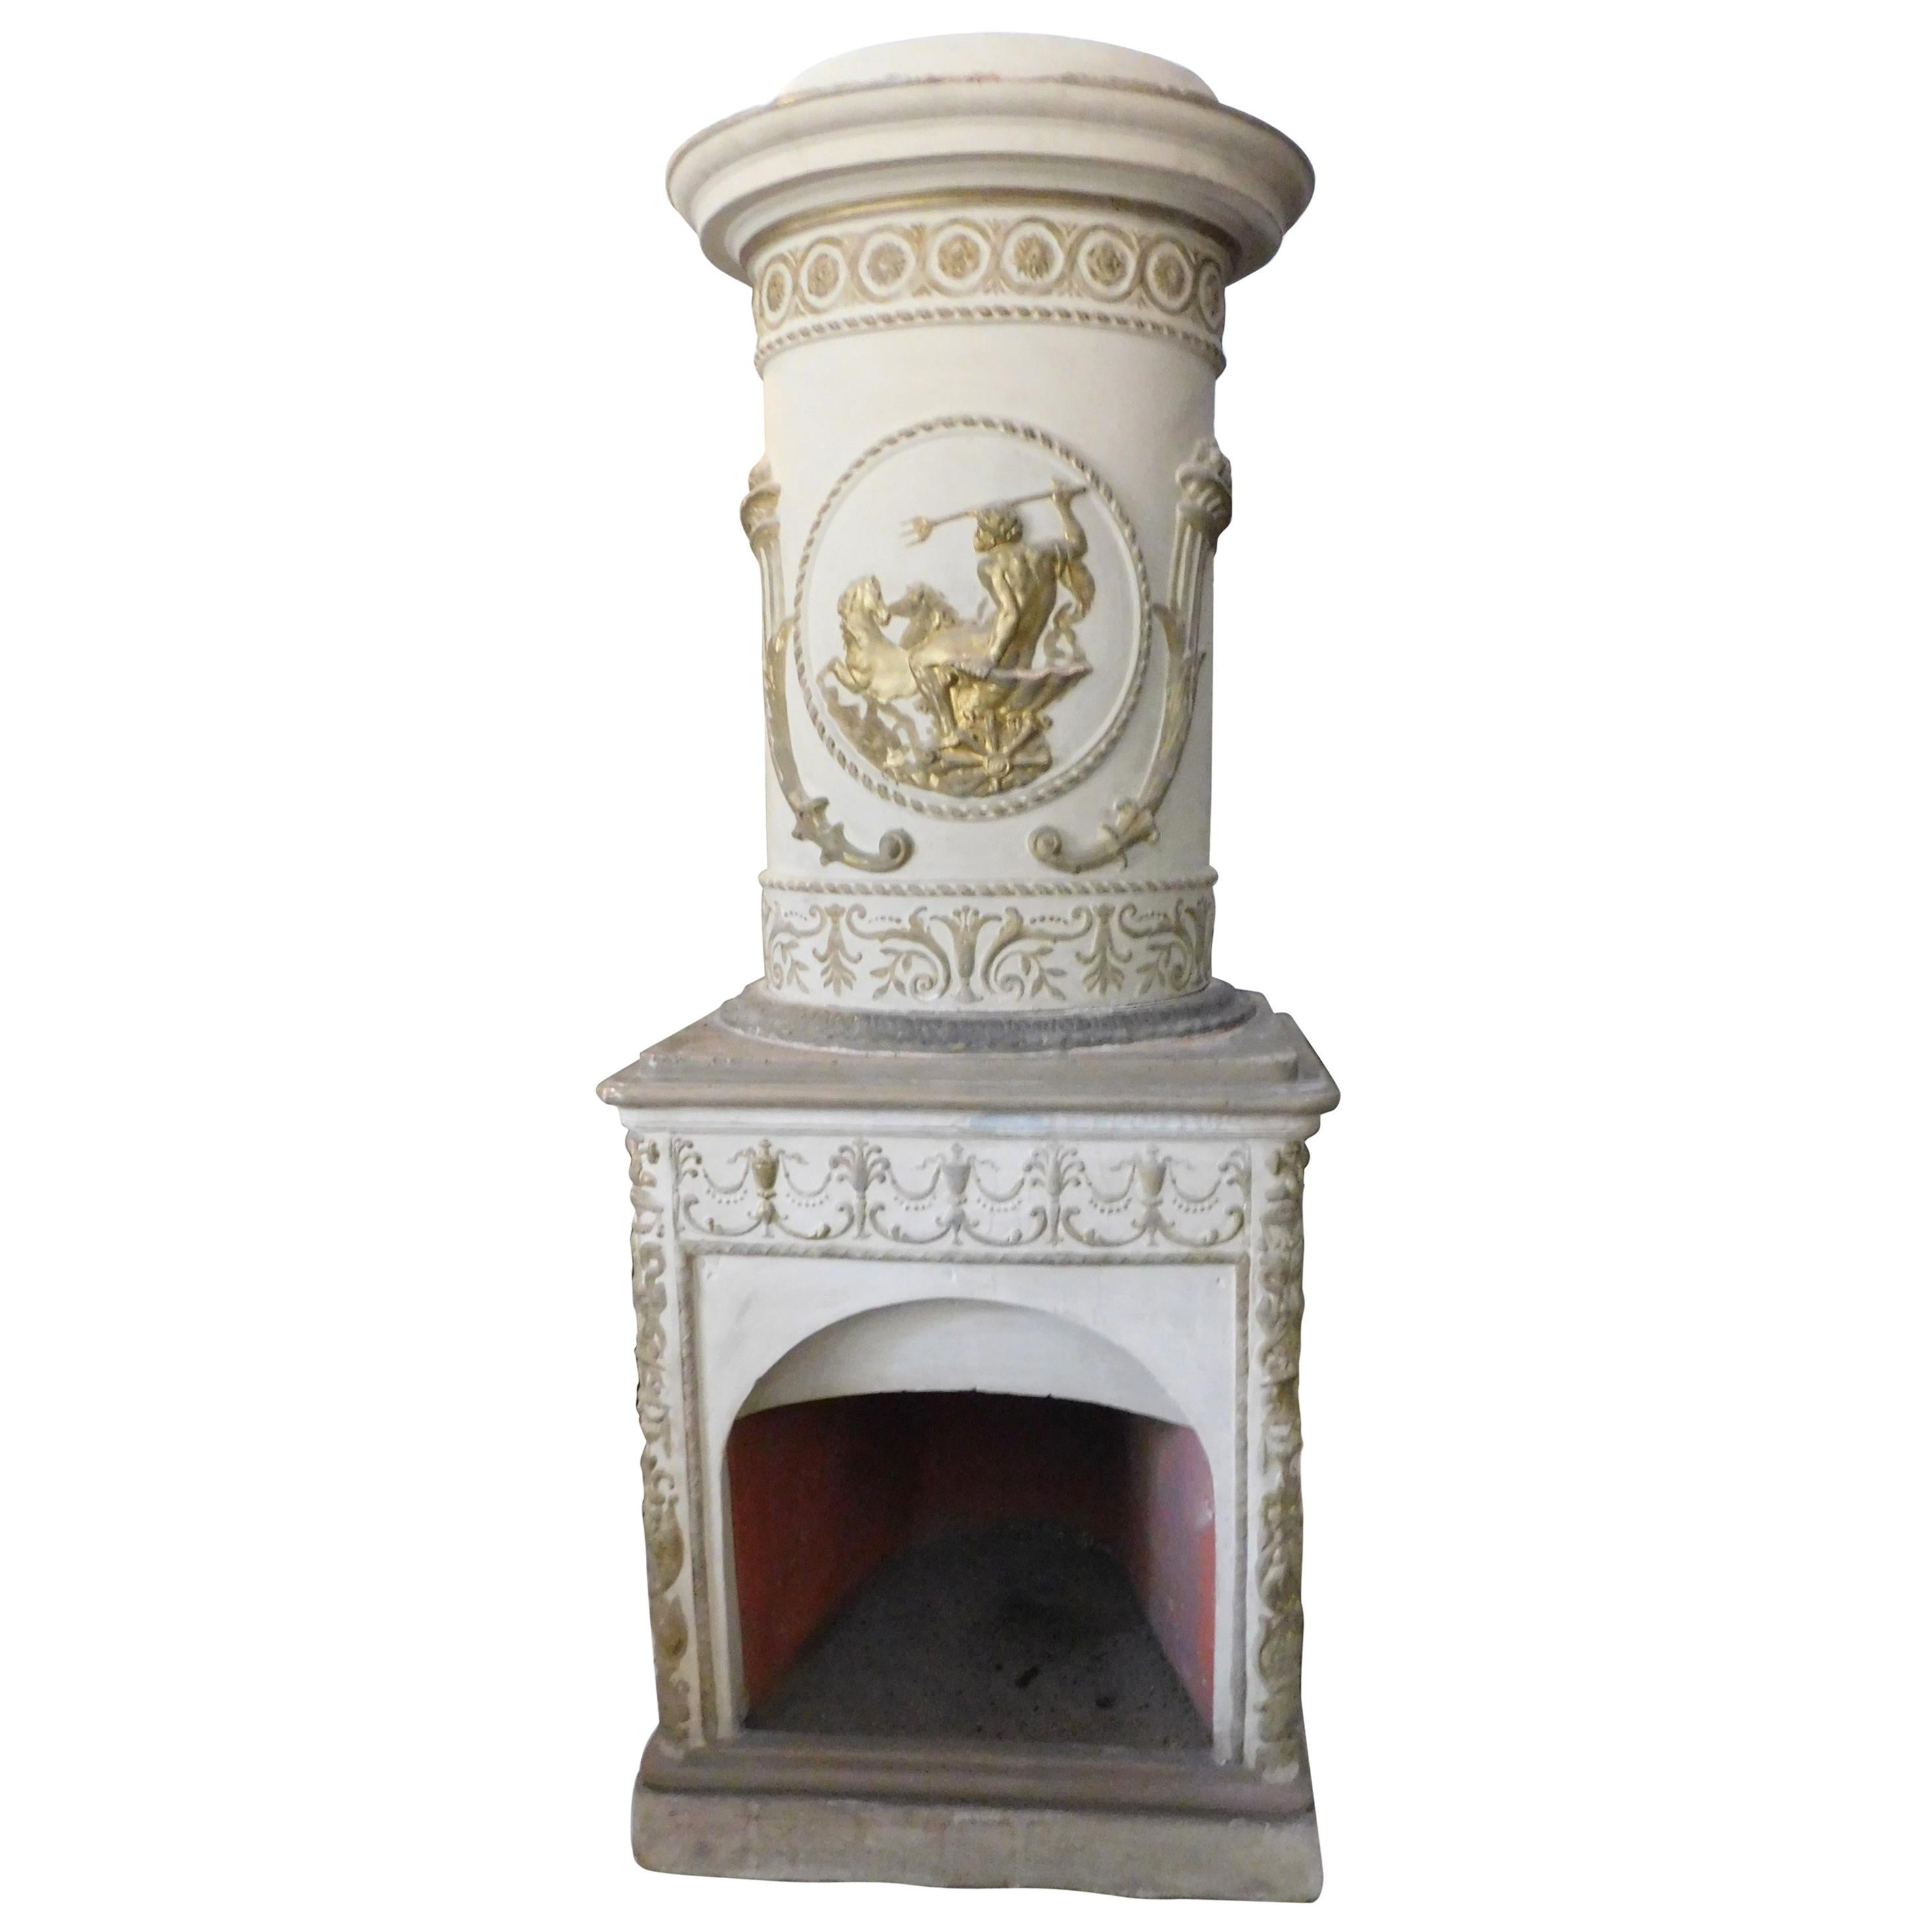 Antique Stove Ceramic White and Gold, Carved Flue, Late 1700 Italy